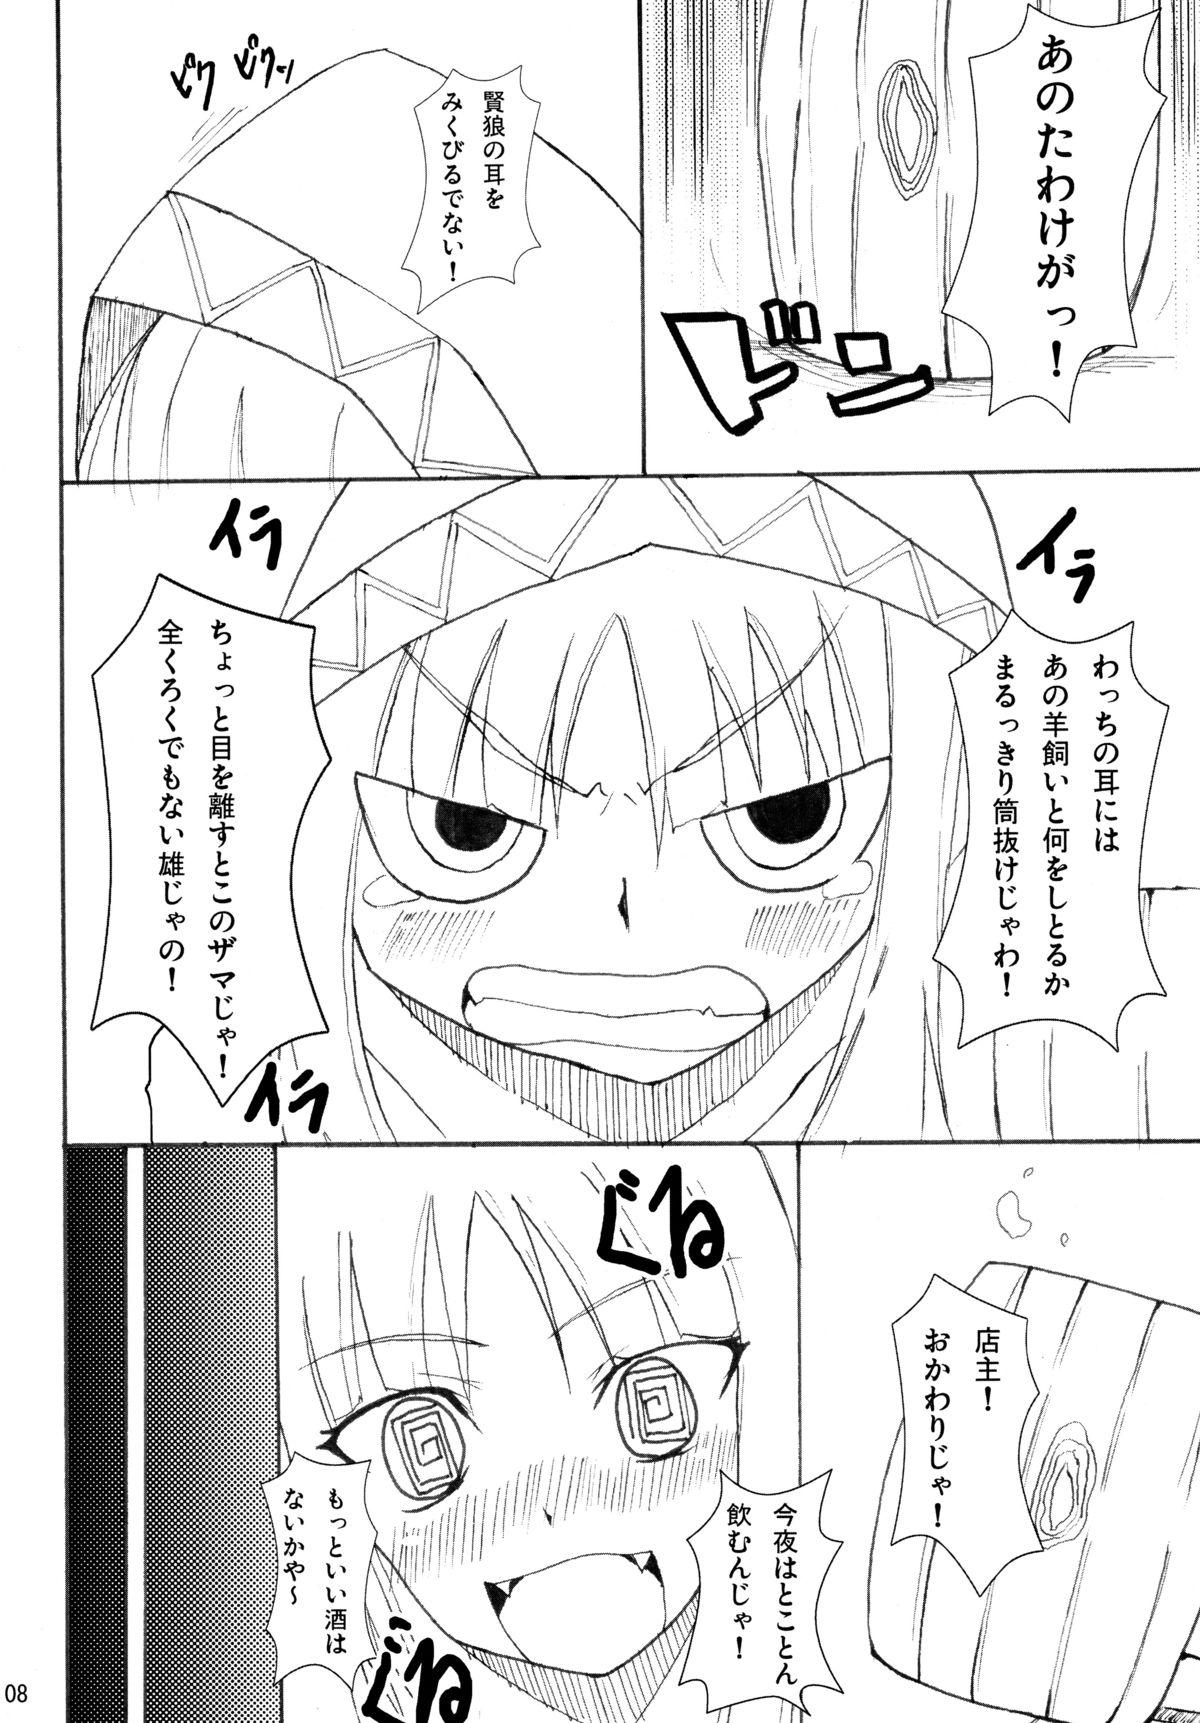 Wam Naked Spice - Spice and wolf Hotfuck - Page 8